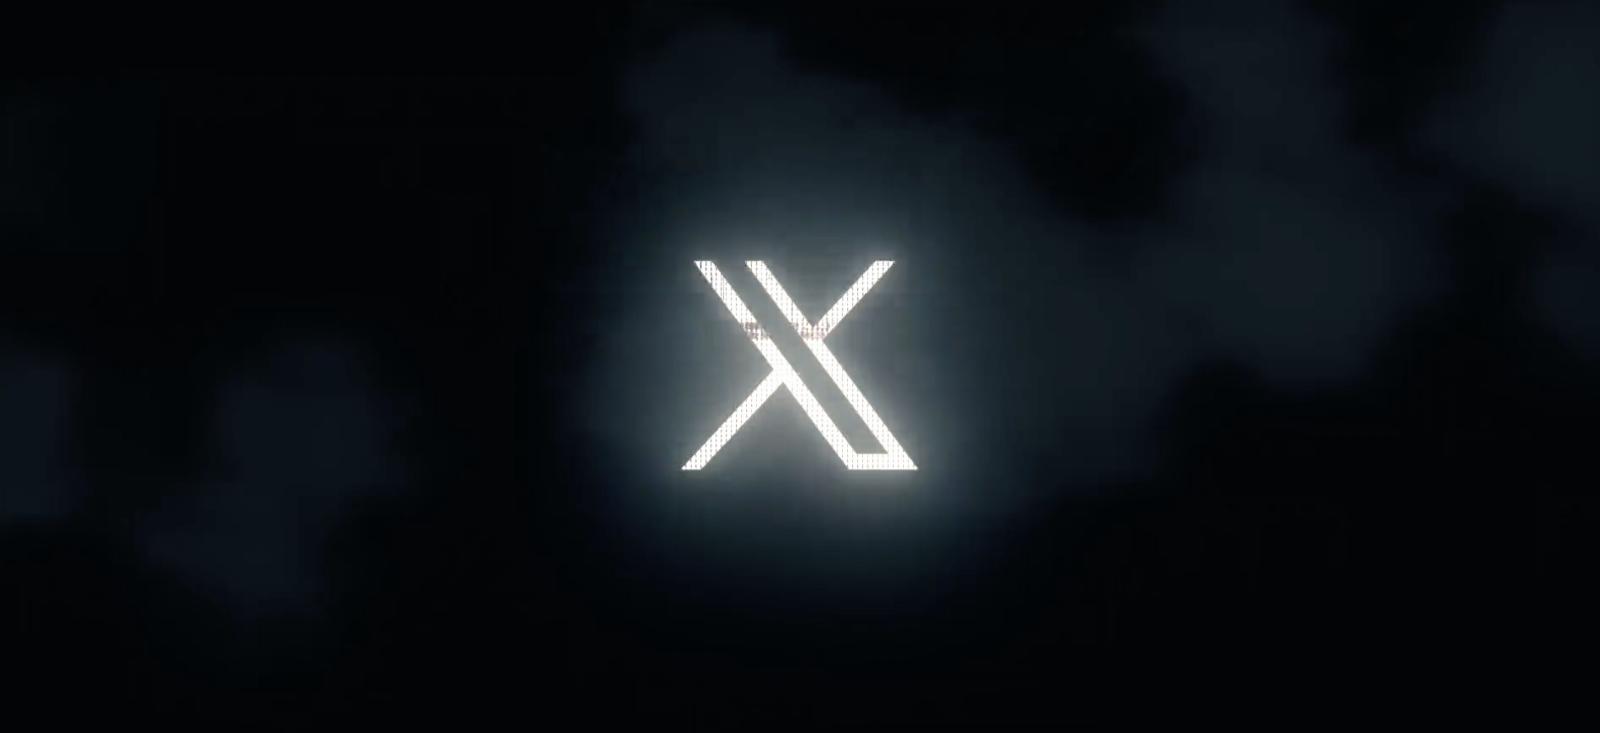 Twitter has officially changed its logo to ‘X’